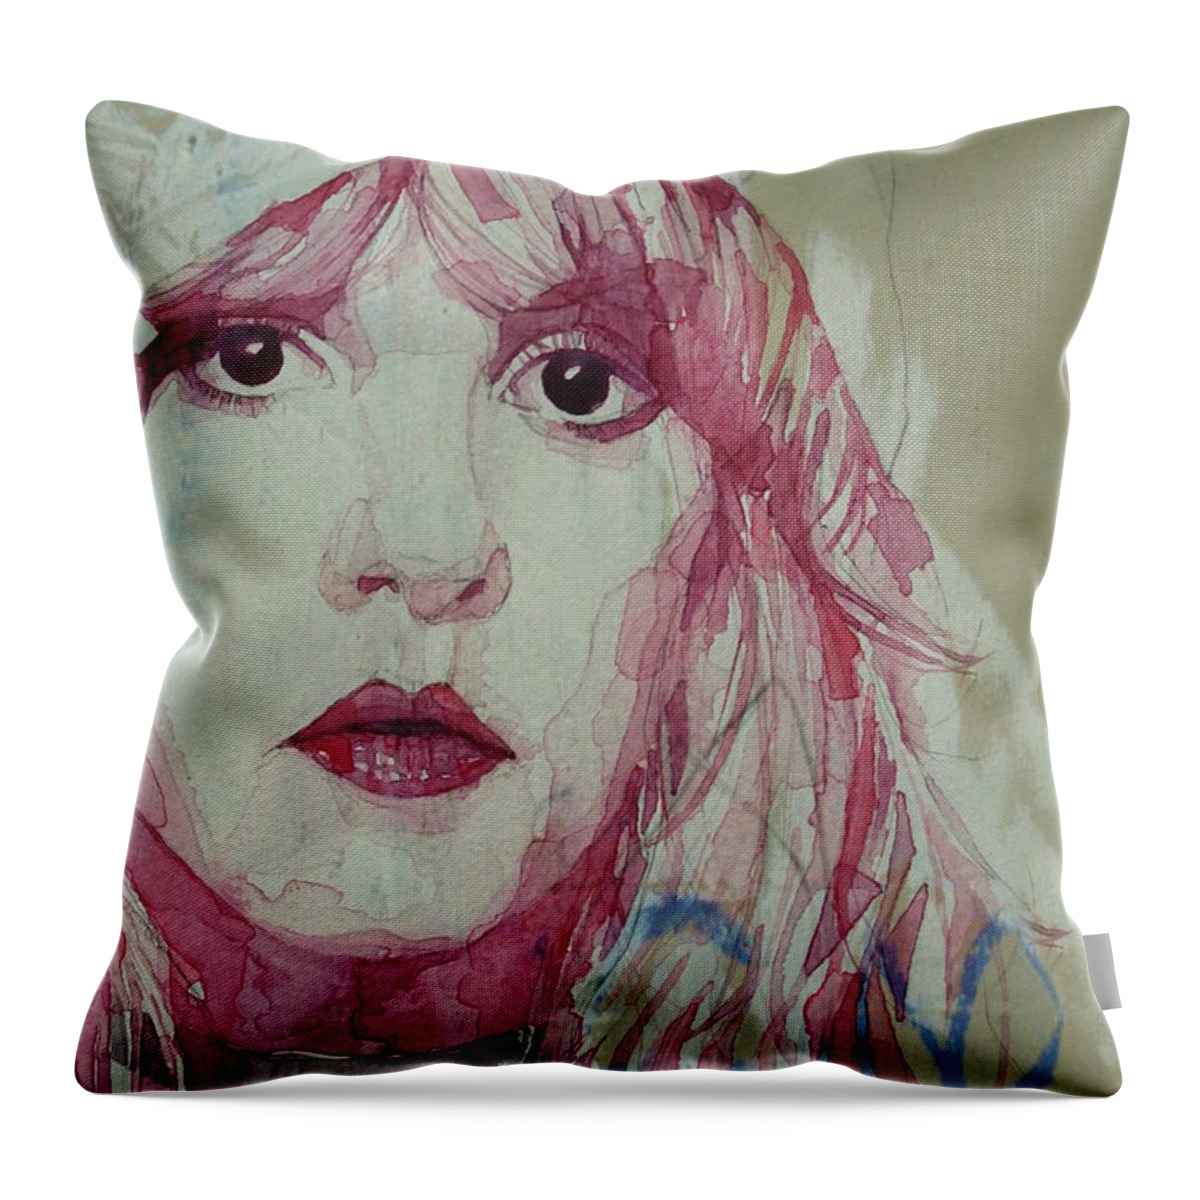 Fleetwood Mac Throw Pillow featuring the painting Stevie Nicks - Fleetwood Mac - Gypsy - Large by Paul Lovering